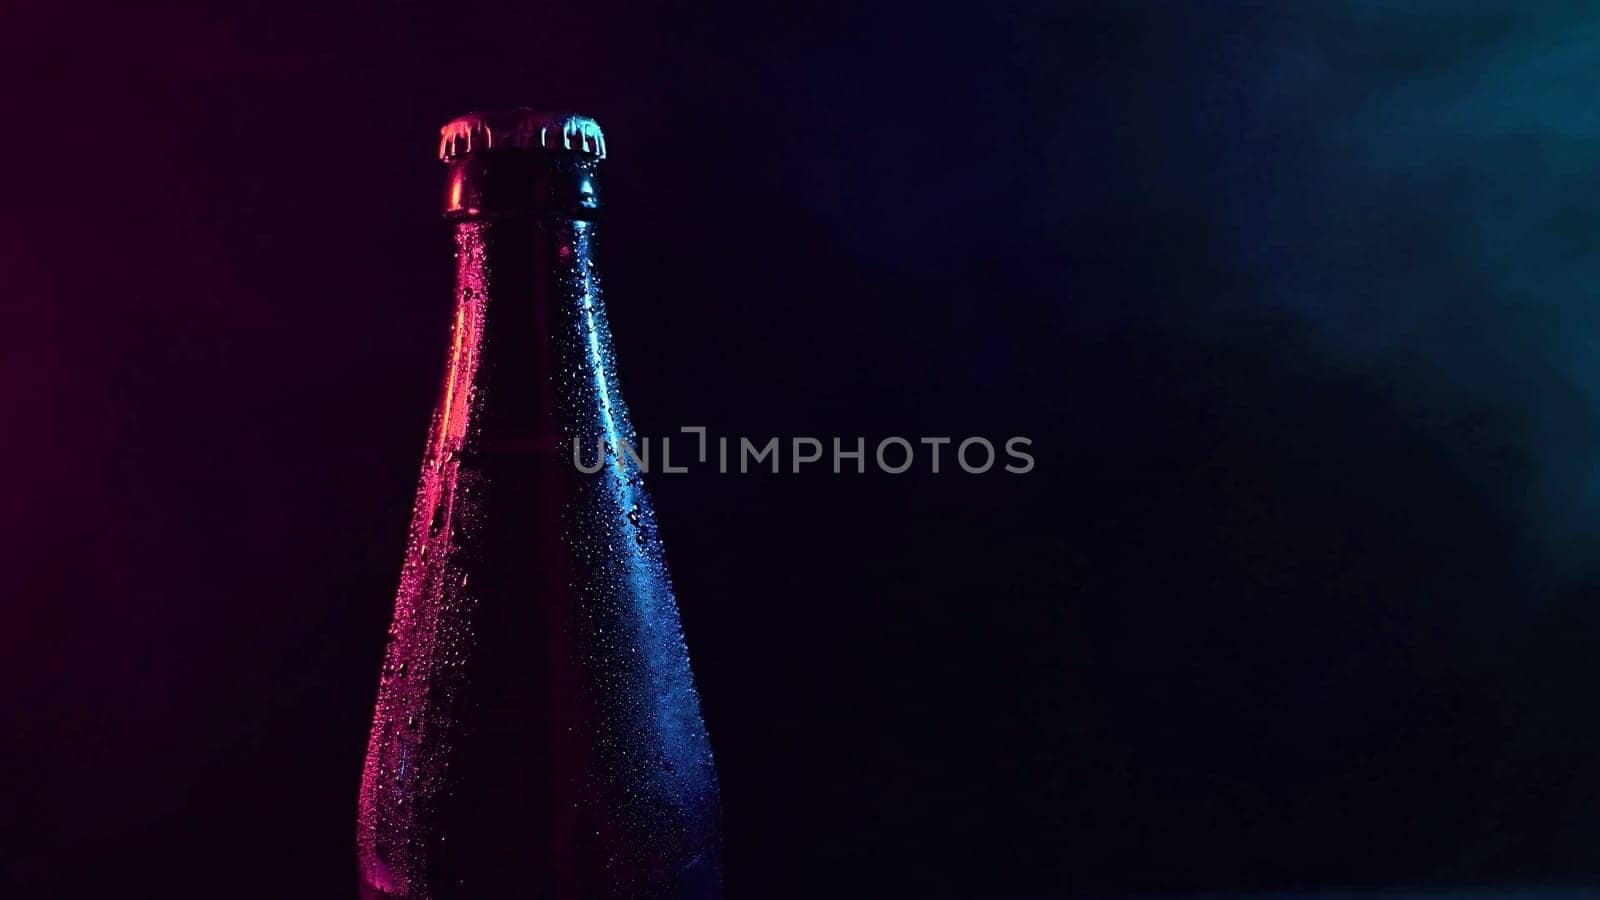 Beer bottle spinning in blue pink smoke. by mrwed54